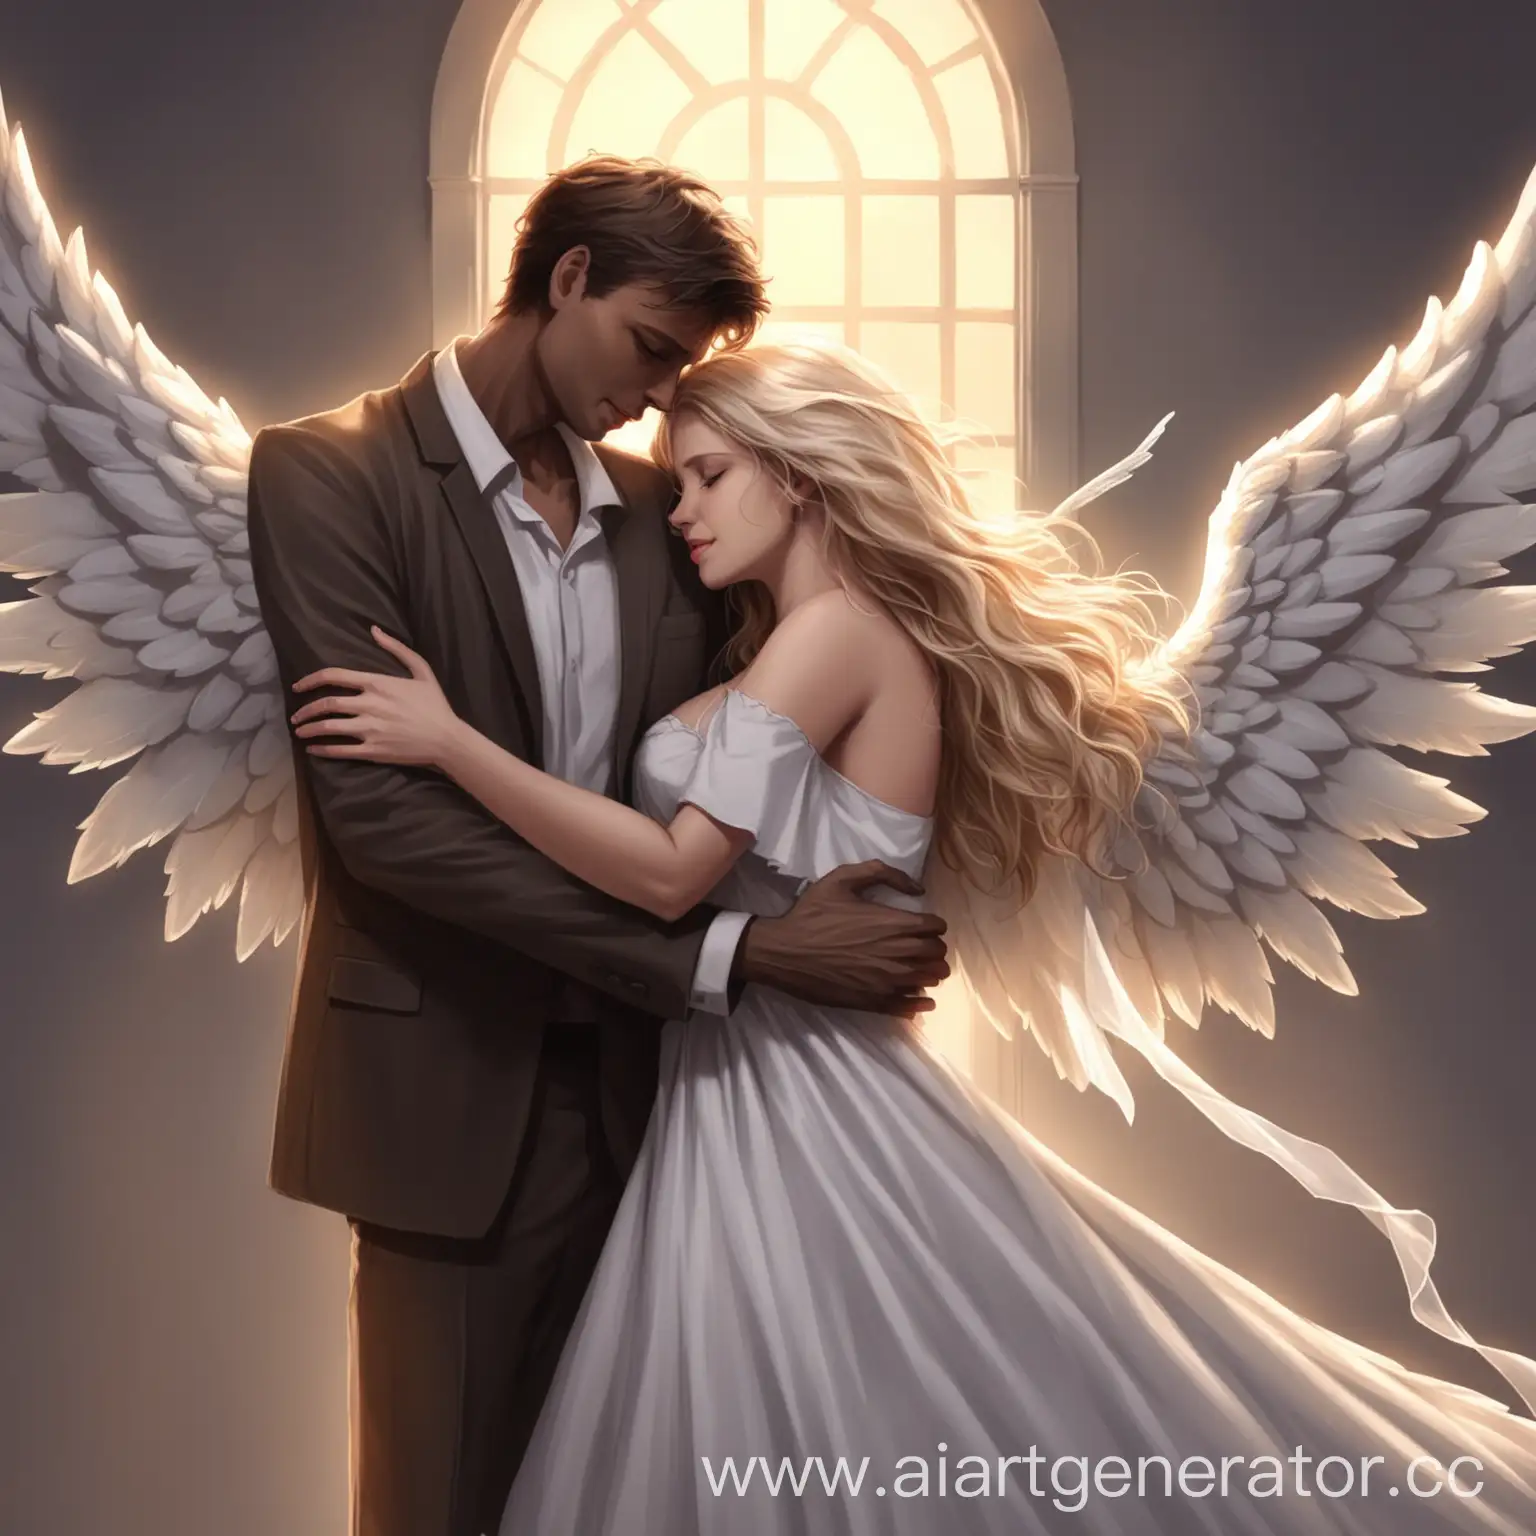 Angel-Falling-in-Love-with-a-Mortal-Man-at-Deaths-Door